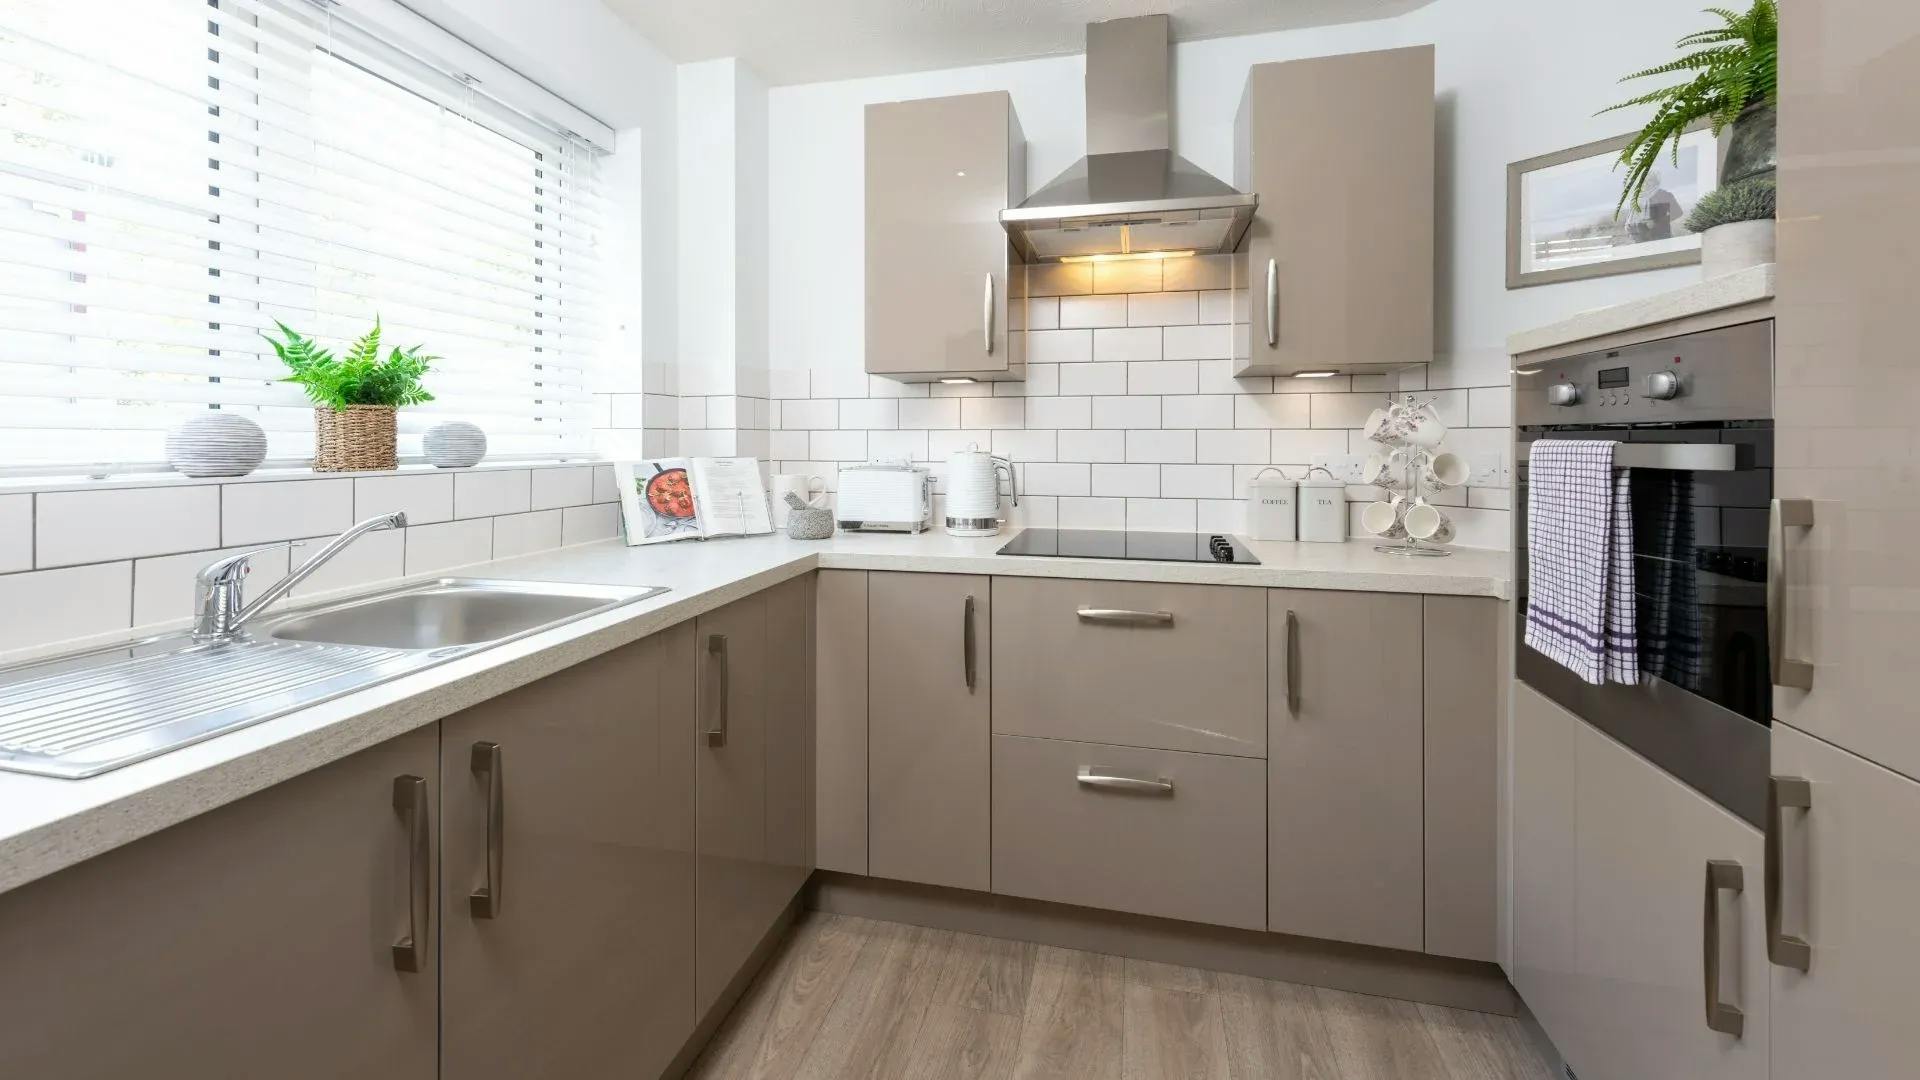 Typical Kitchen of Wessex Lodge Care in Camberley, Surrey Heath